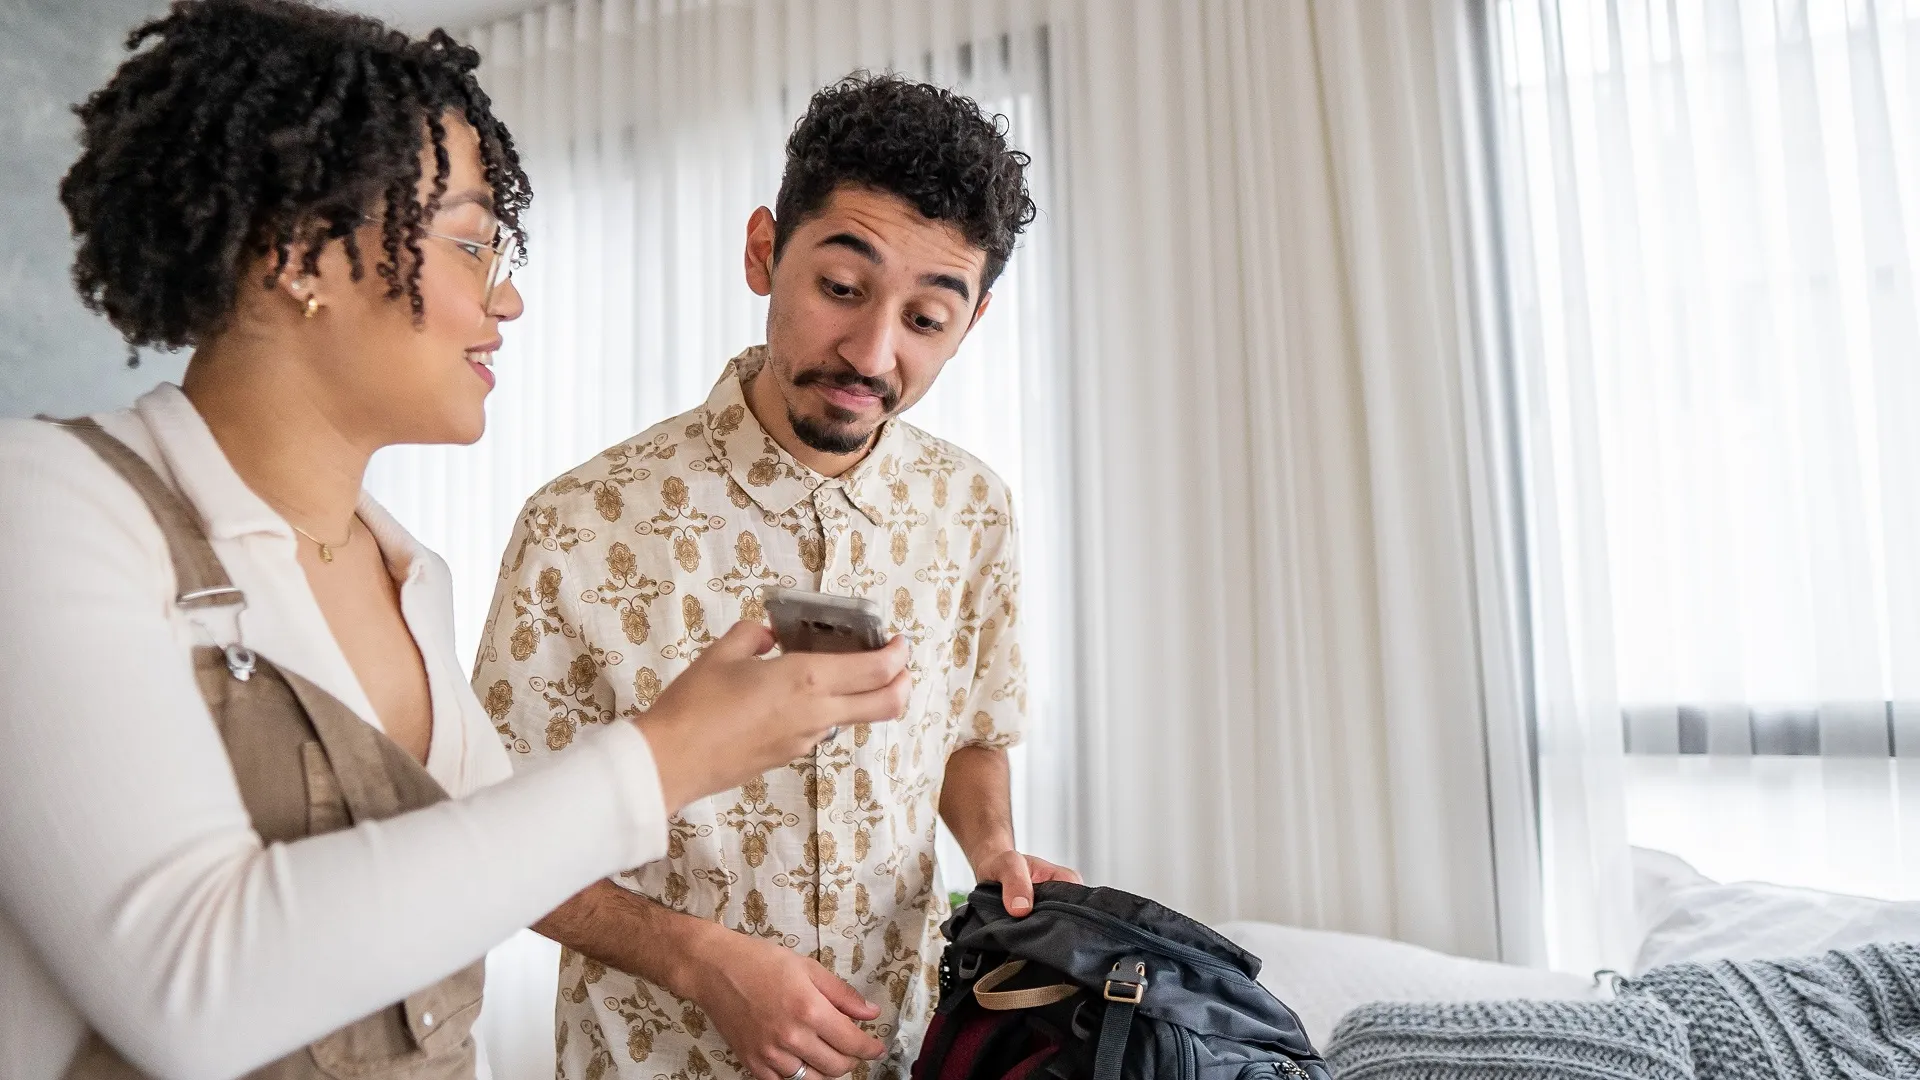 Couple checking reservation on smartphone stock photo